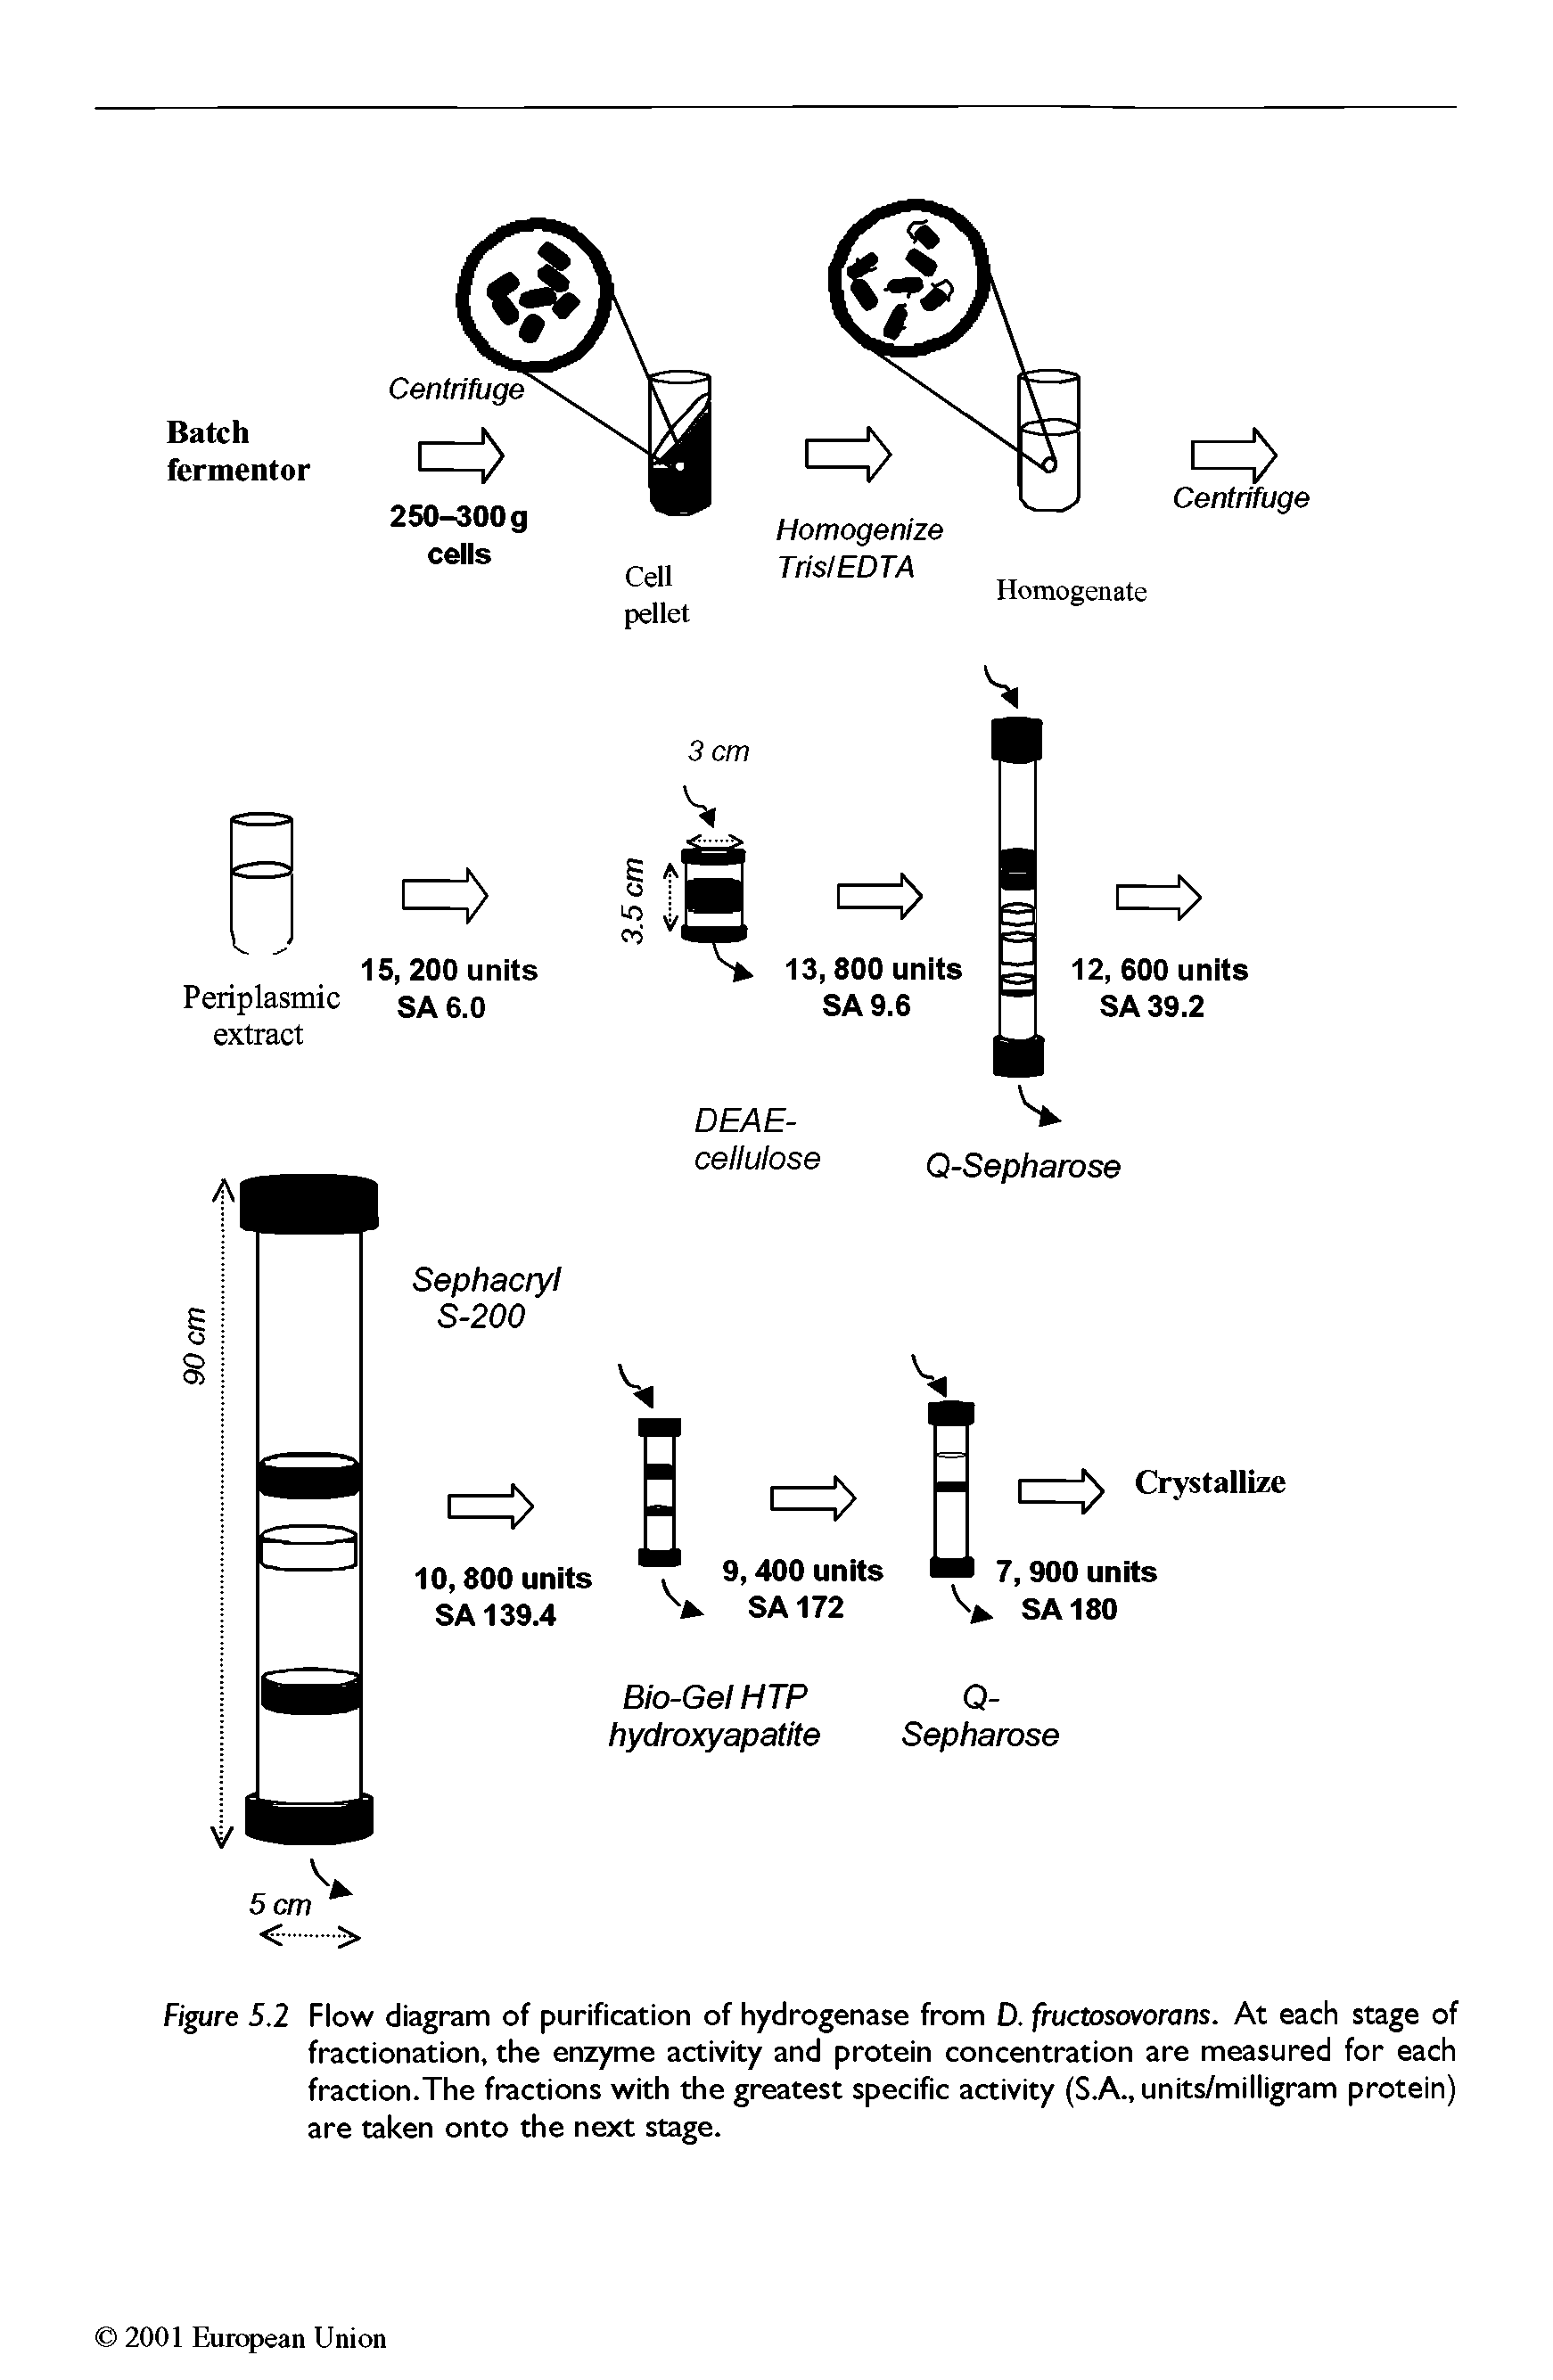 Figure 5.2 Flow diagram of purification of hydrogenase from D. fructosovorans. At each stage of fractionation, the enzyme activity and protein concentration are measured for each fraction.The fractions with the greatest specific activity (S.A., units/milligram protein) are taken onto the next stage.